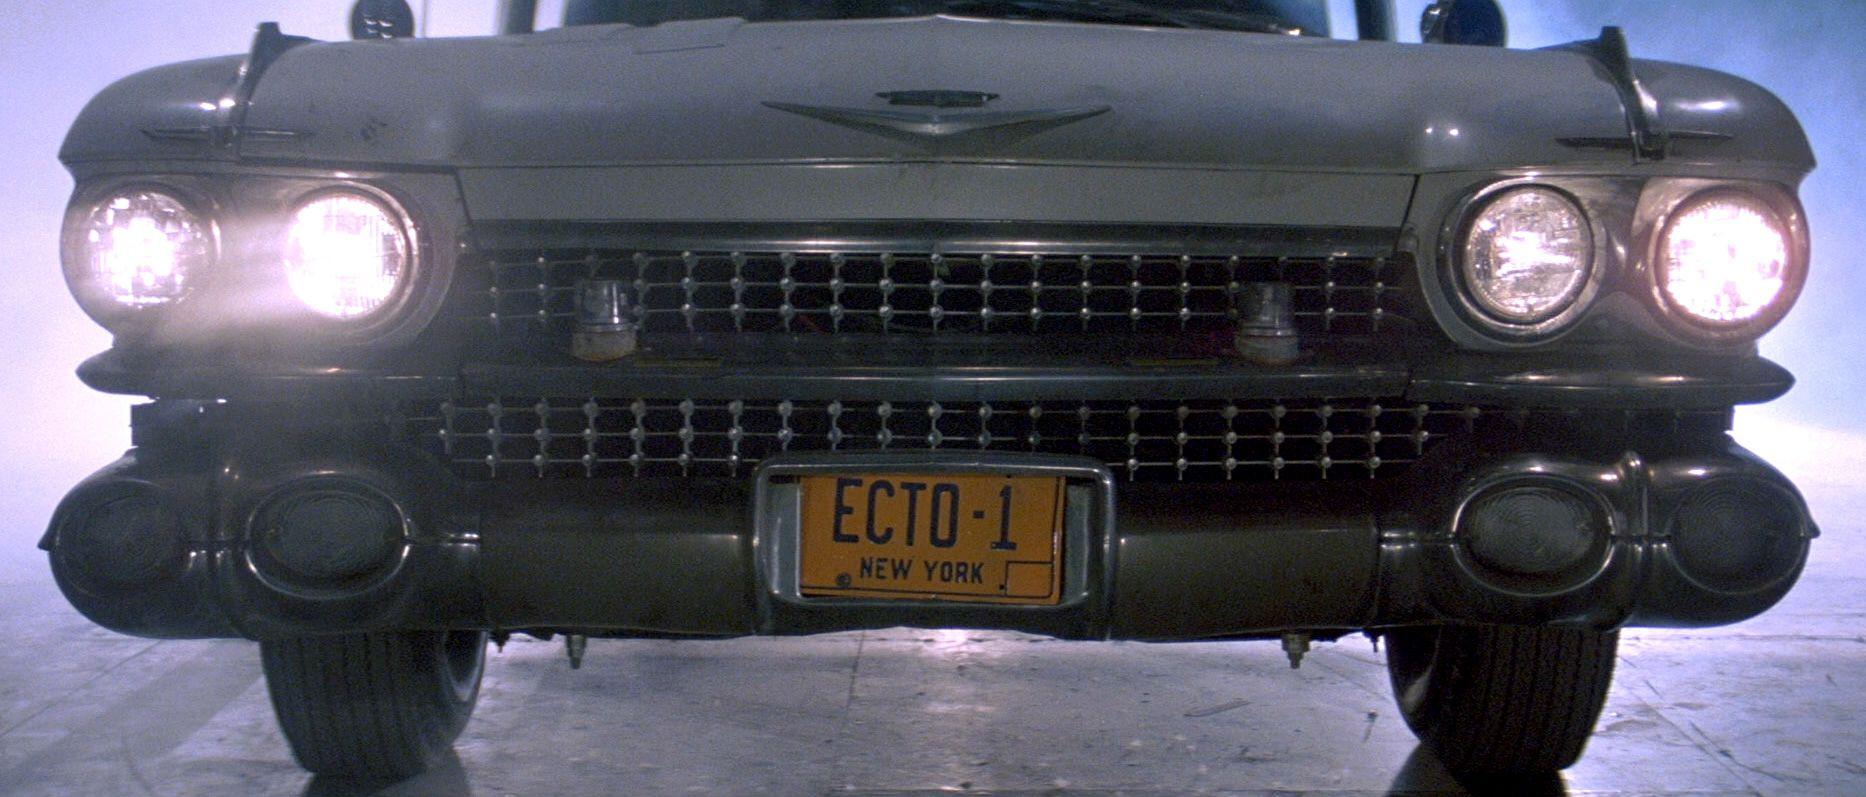 Ghostbusters: Ecto 1 License Plate. License Plates, Ghostbusters